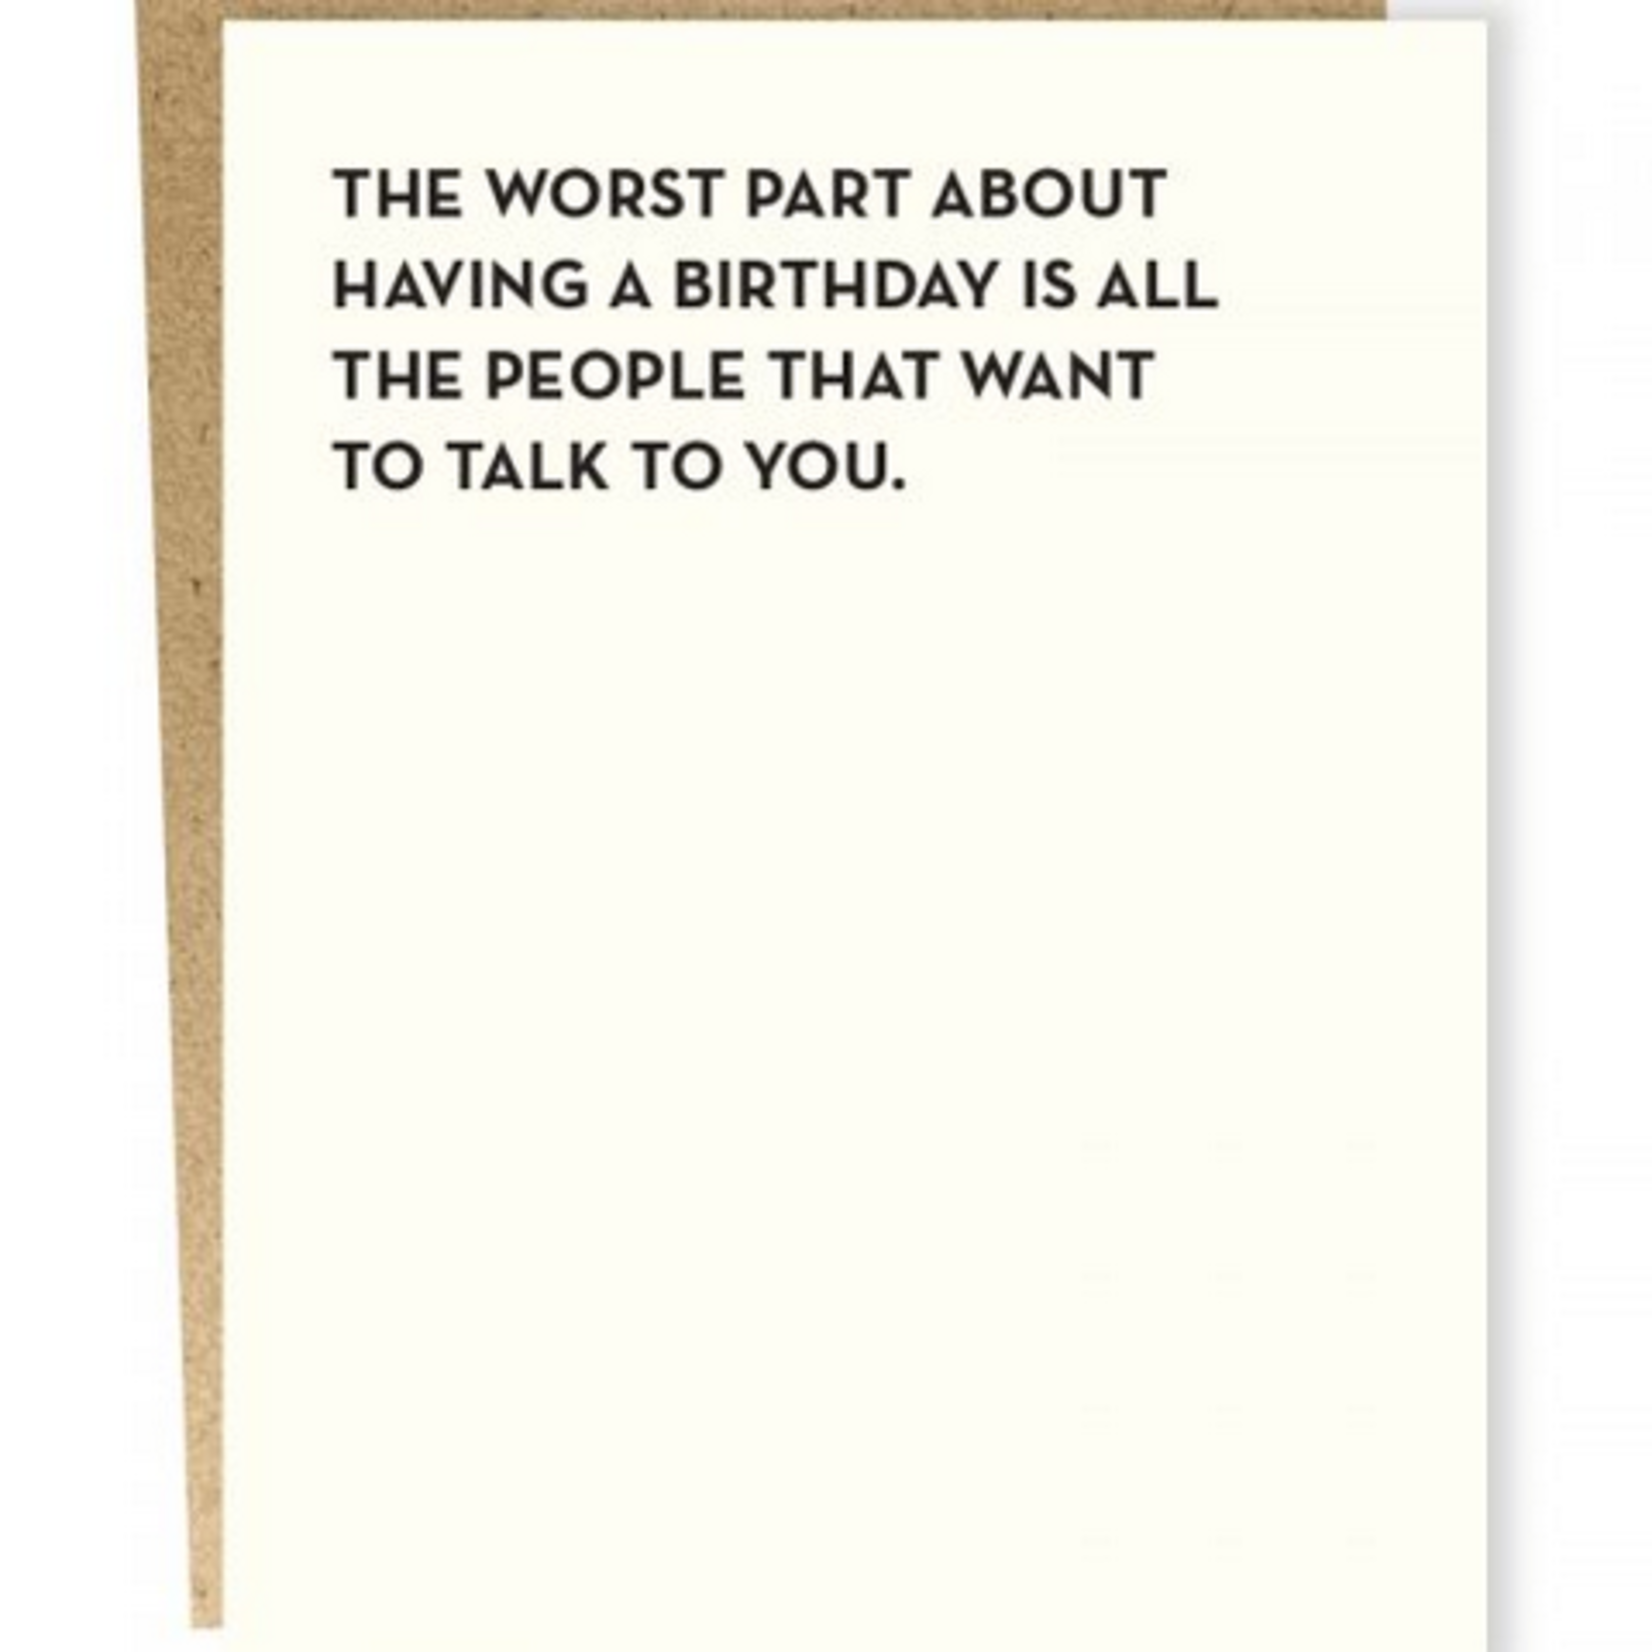 Card #928 - The Worst Part About A Birthday Is People Want To Talk To You